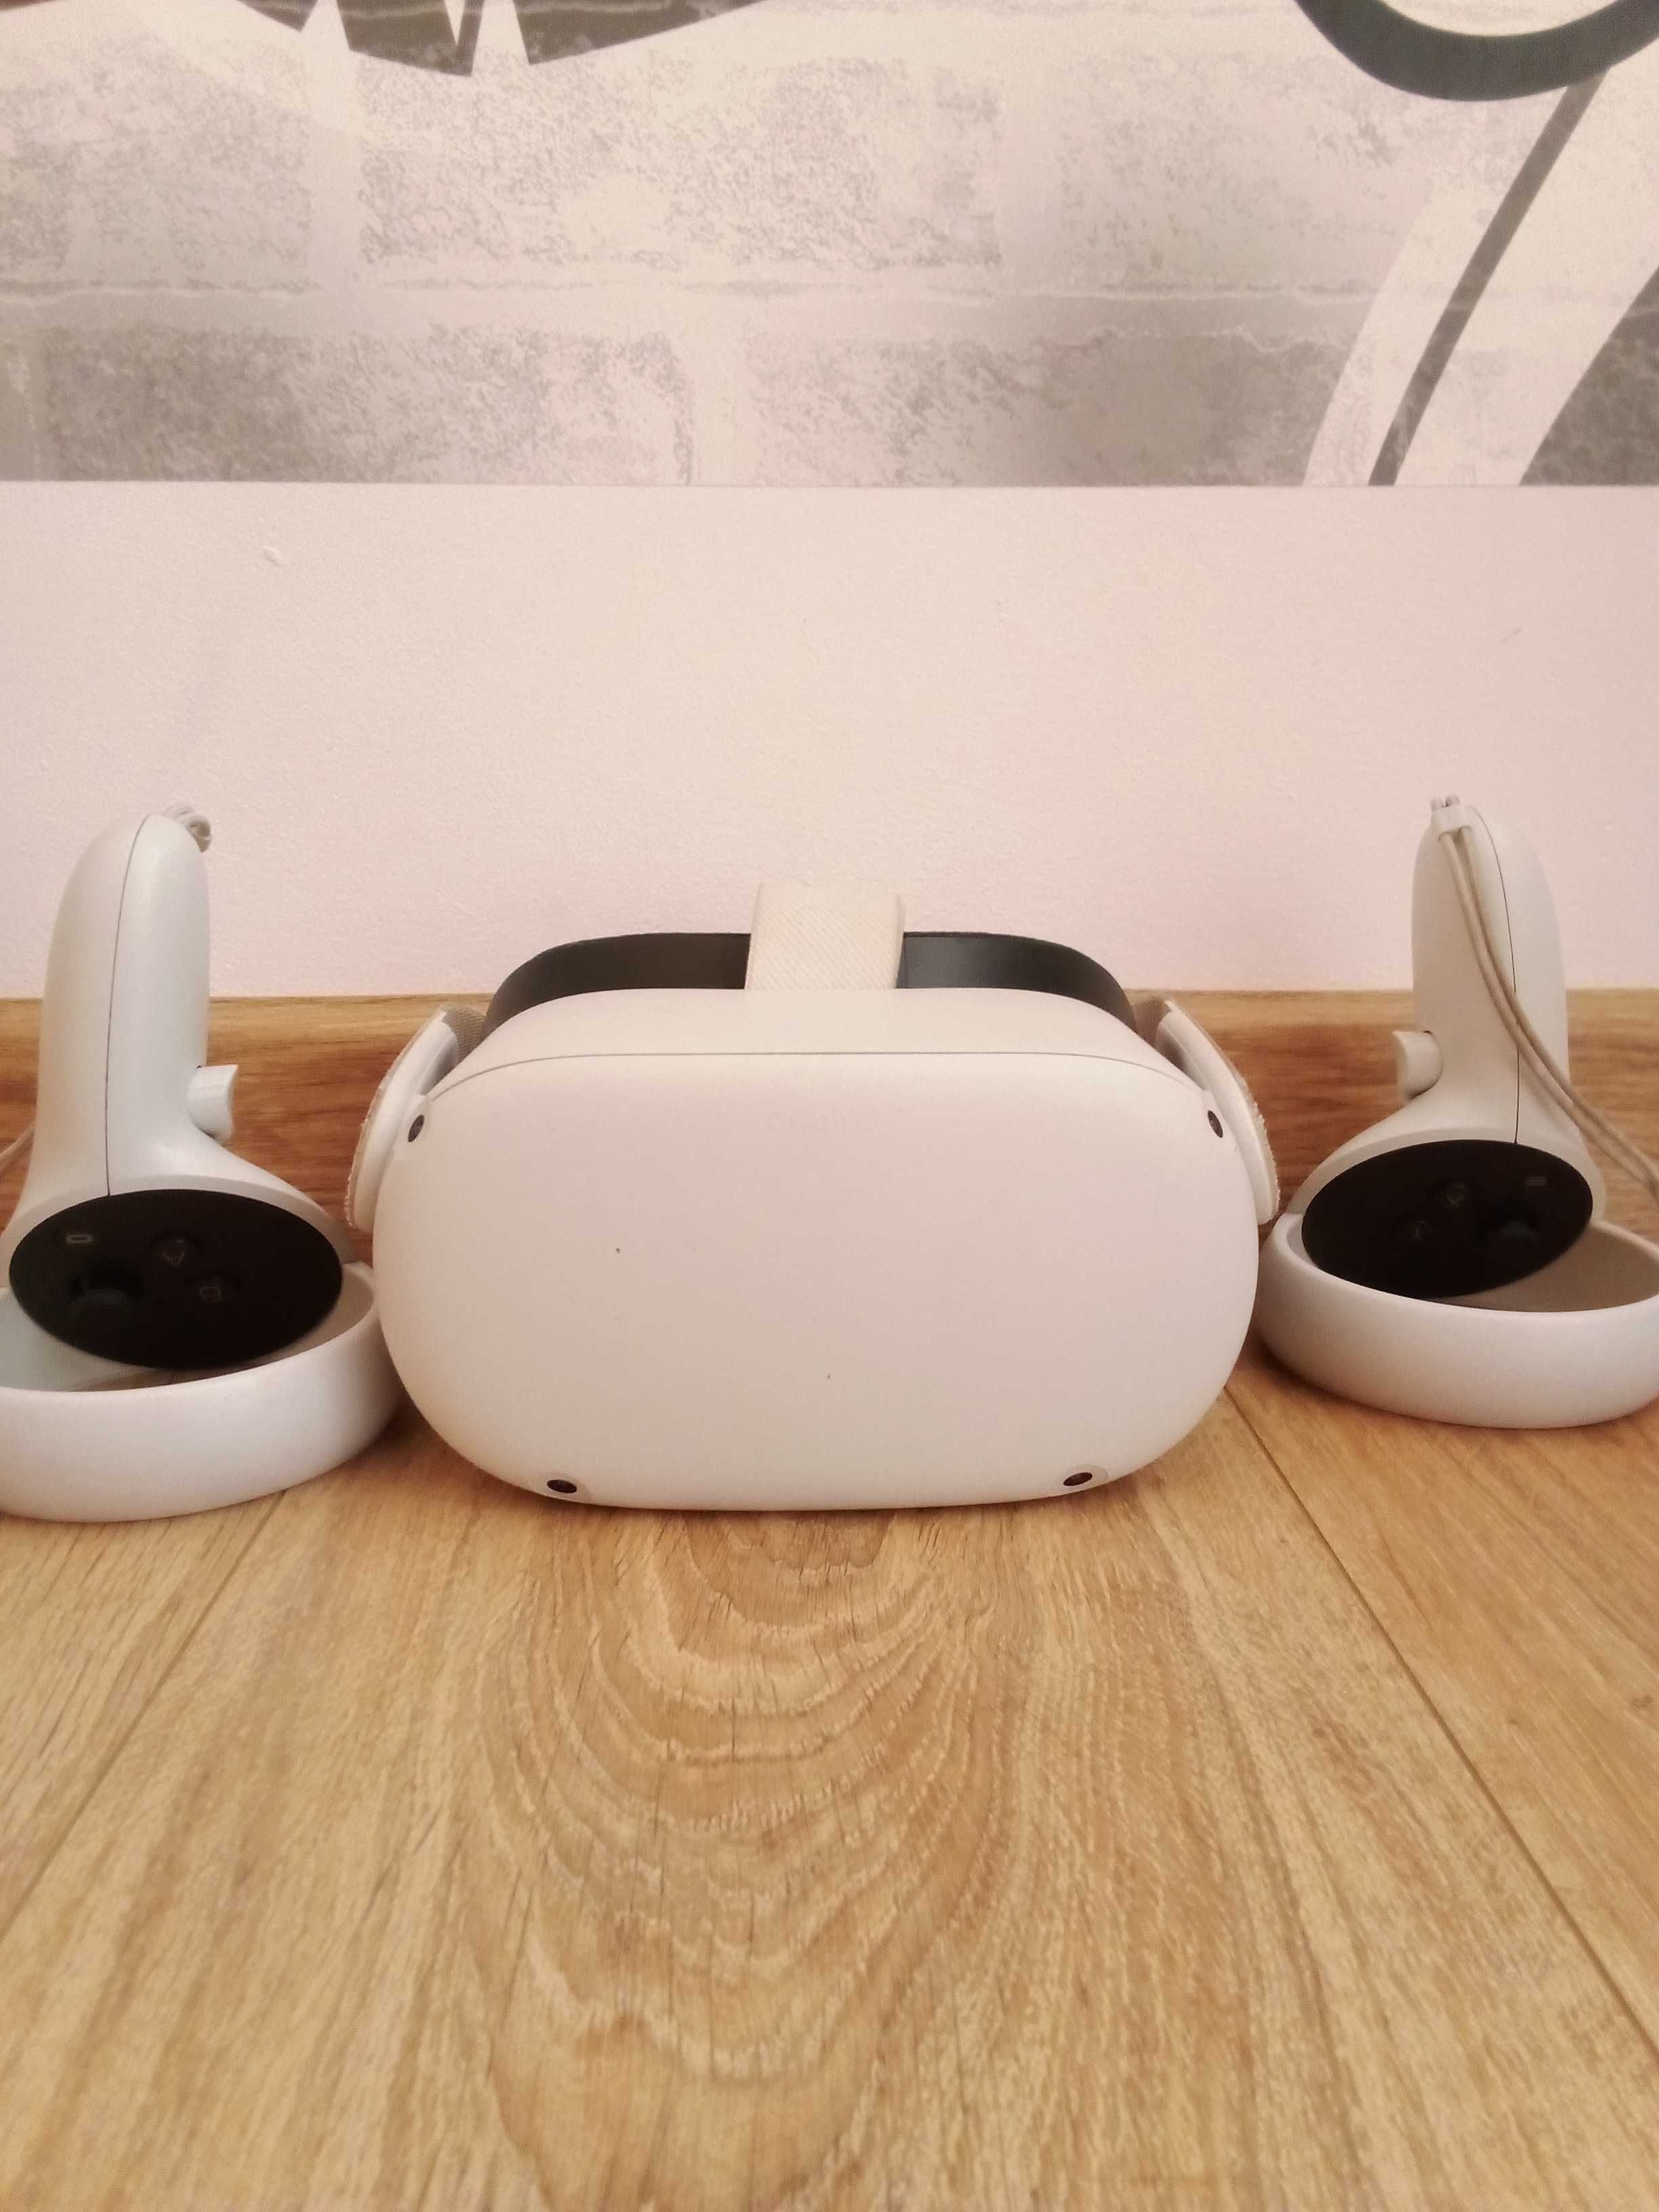 Quest 2 vr 128gb